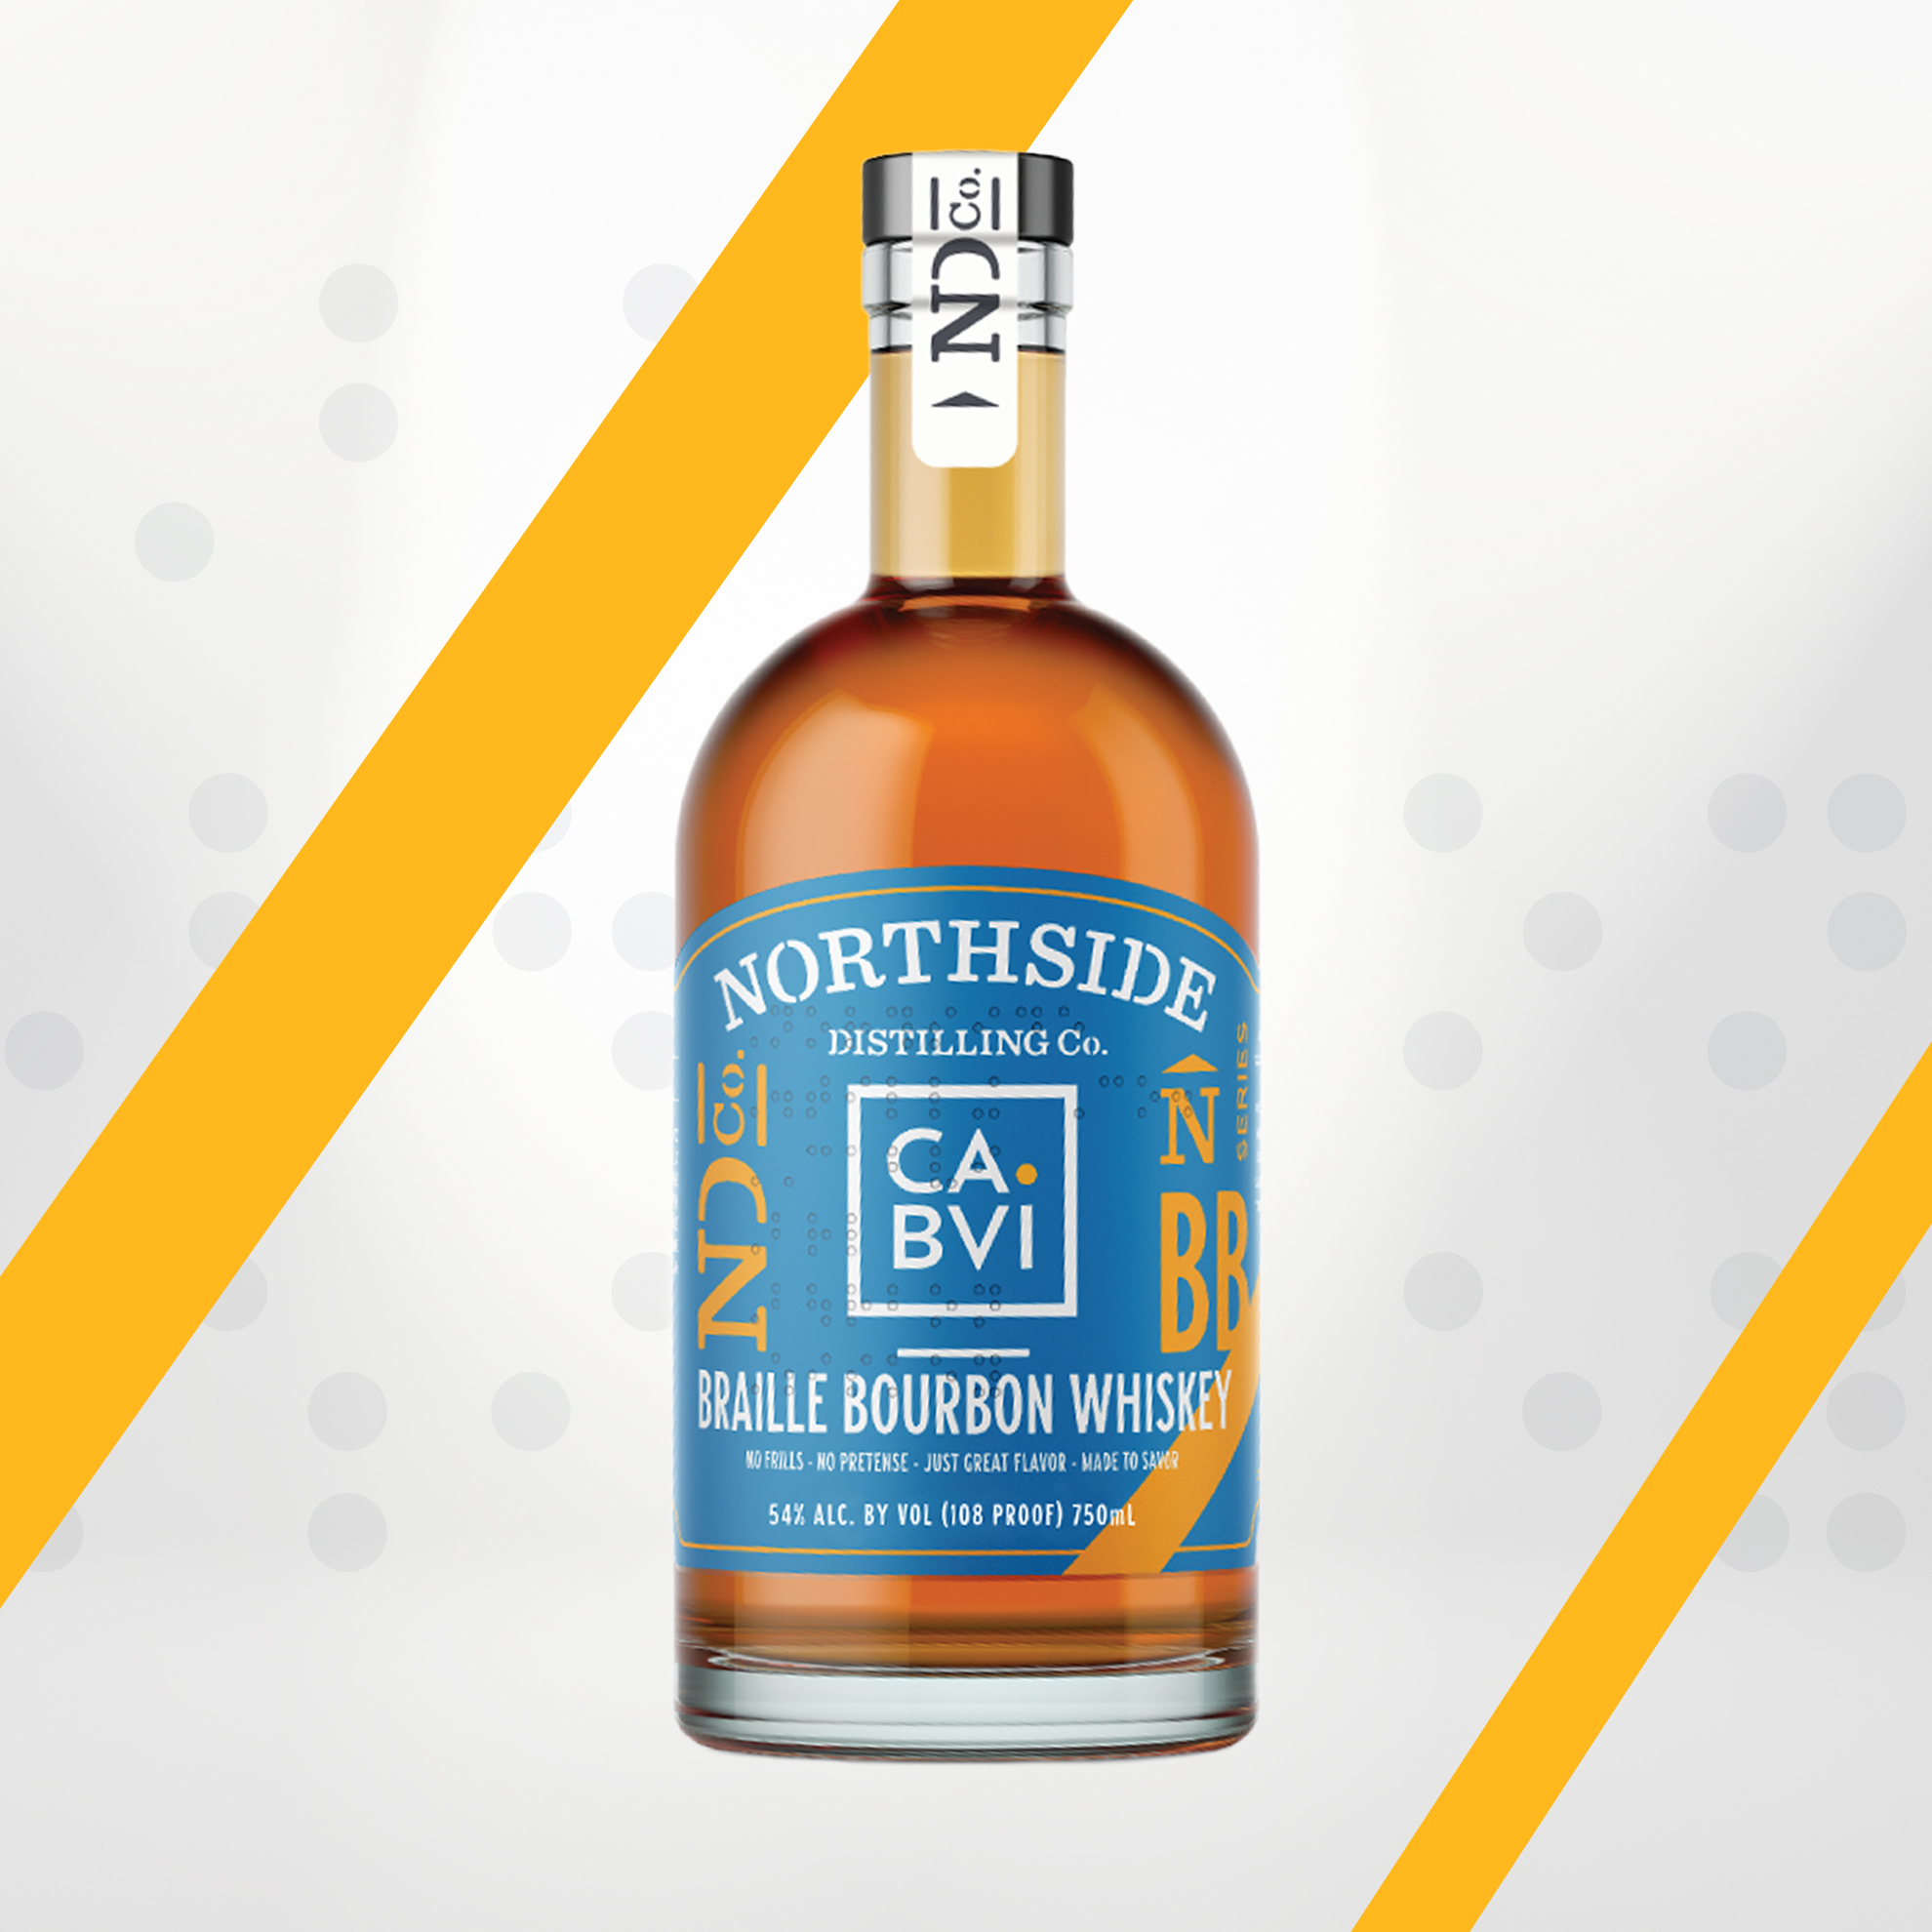 Bottle has blue and gold label and reads CABVI Northside Distilling Co. Braille Bourbon Whiskey